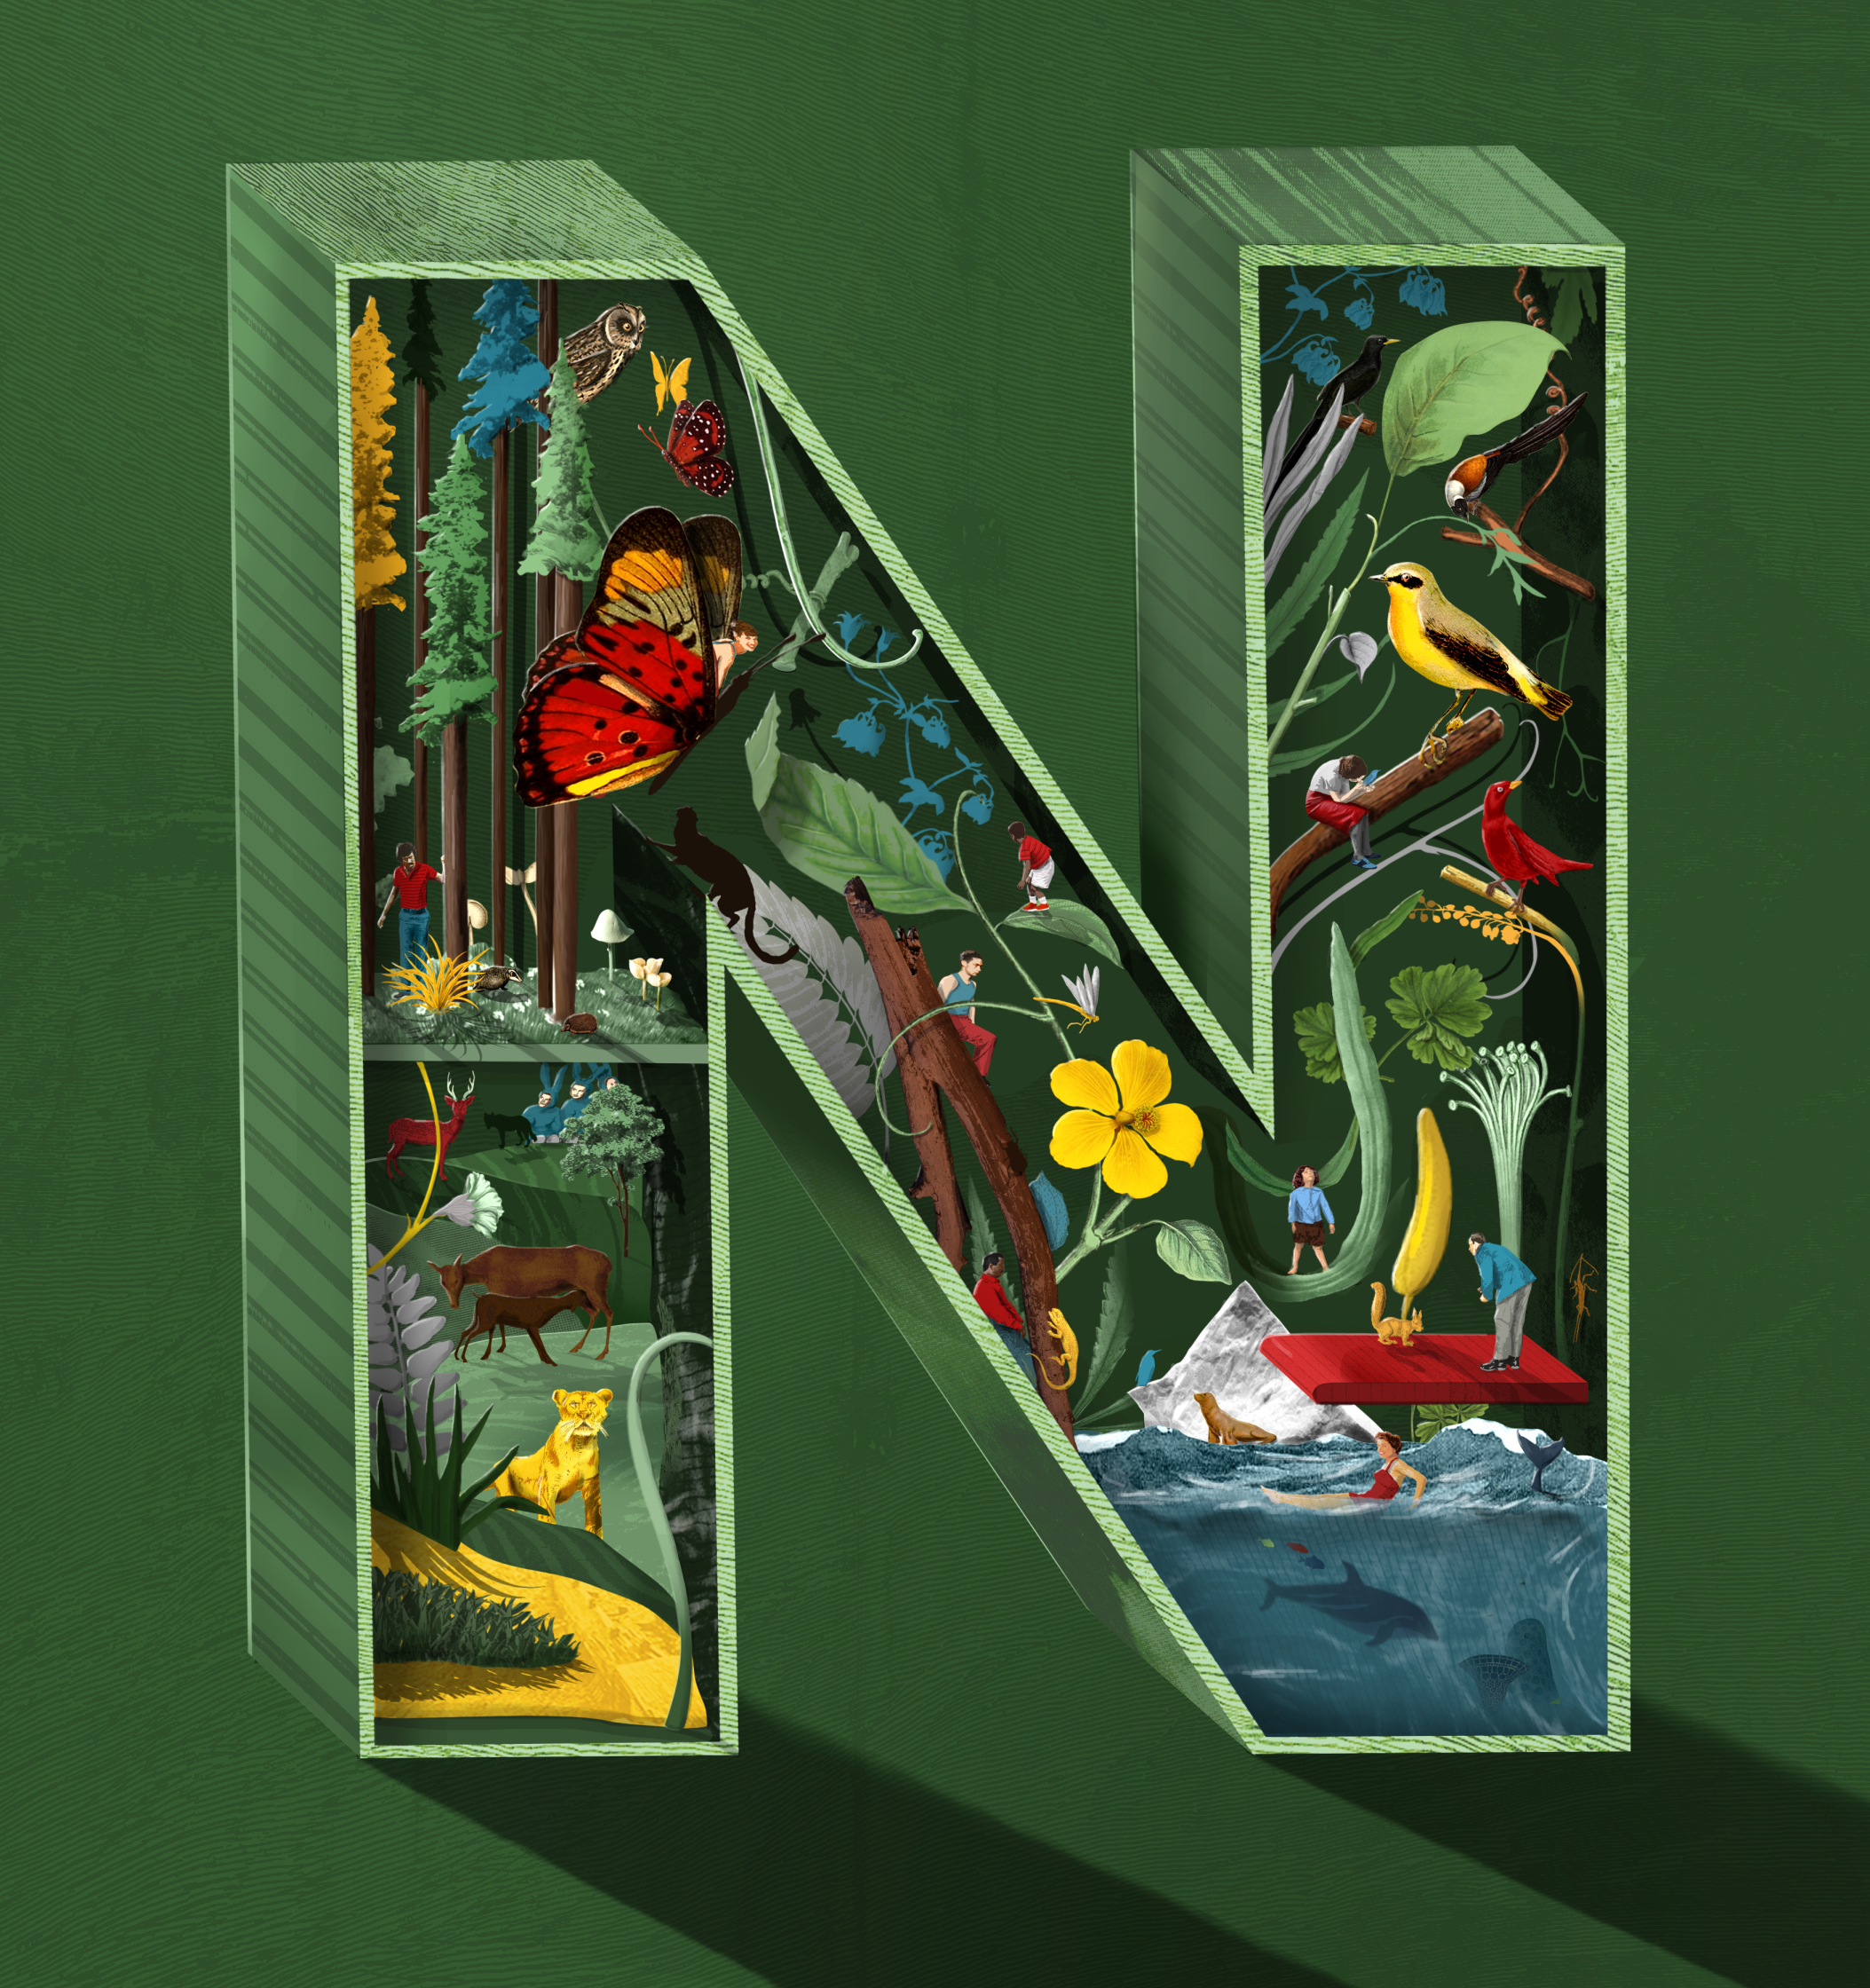 N is for Nature